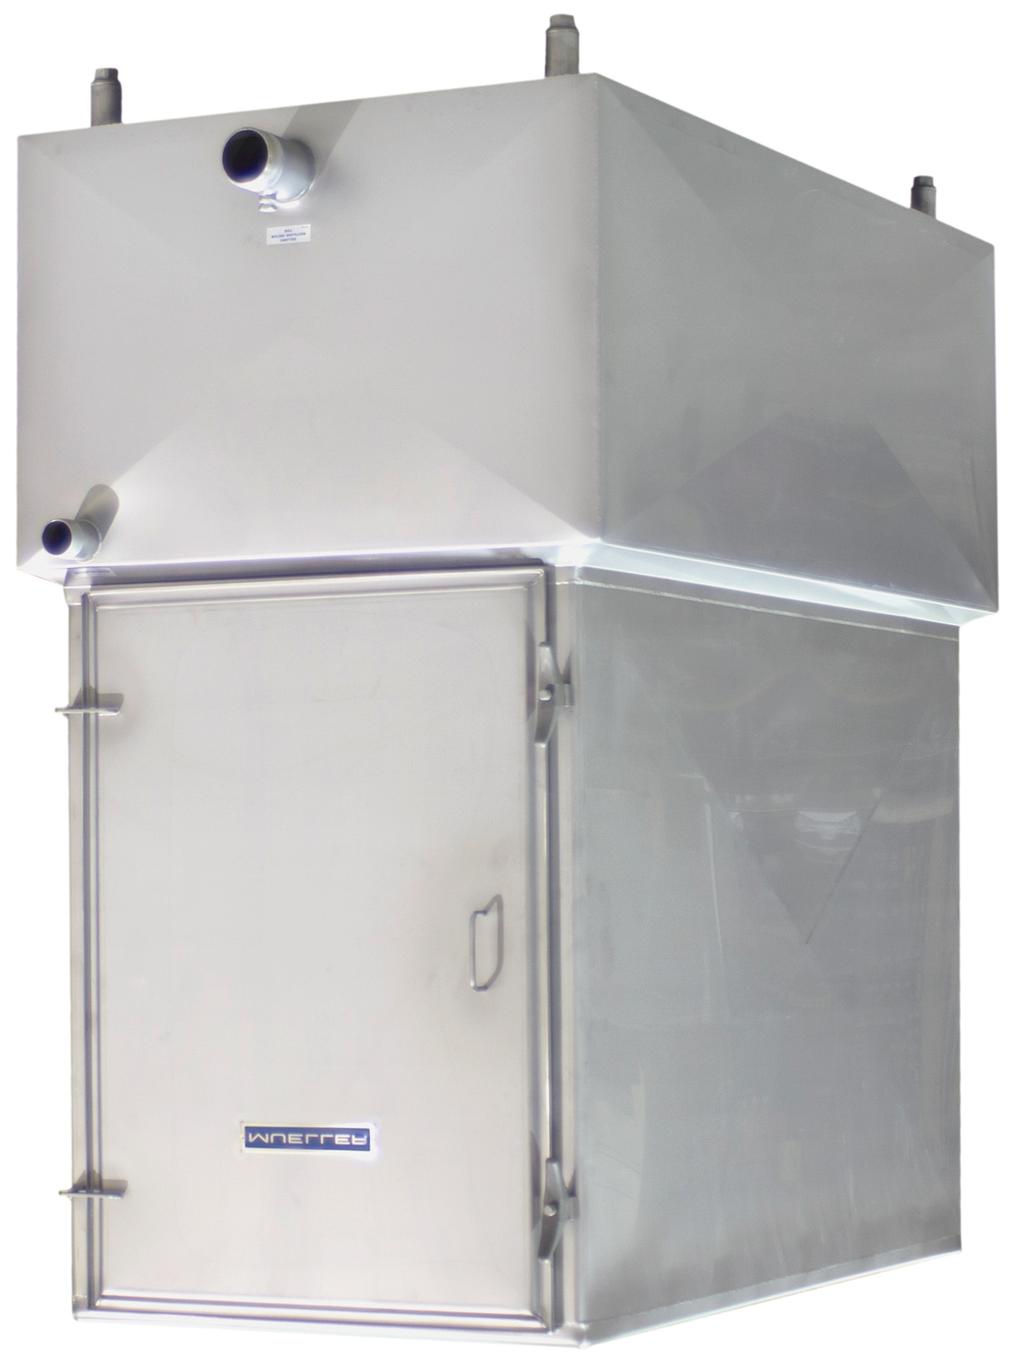 PAUL MUELLER COMPANY 3 x 5 Falling Film Chiller Paul Mueller Company s 3 x 5 falling film chiller reduces chilling time, increases production, and brings a faster return on your investment.